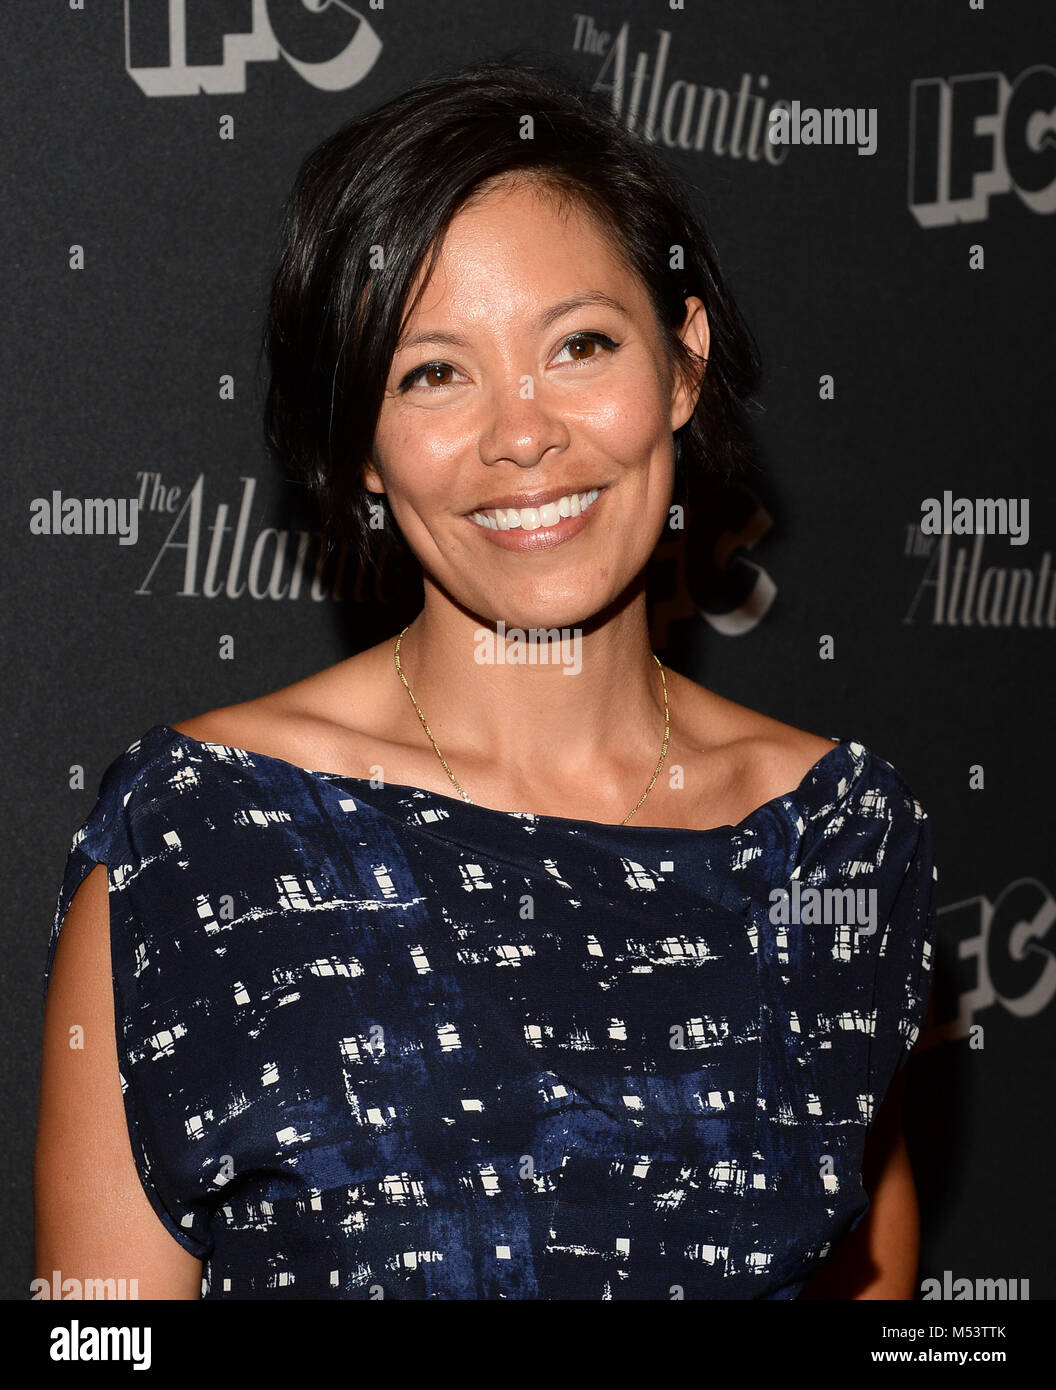 alex wagner | Hairstyle, Growing out short hair styles, Face shape  hairstyles